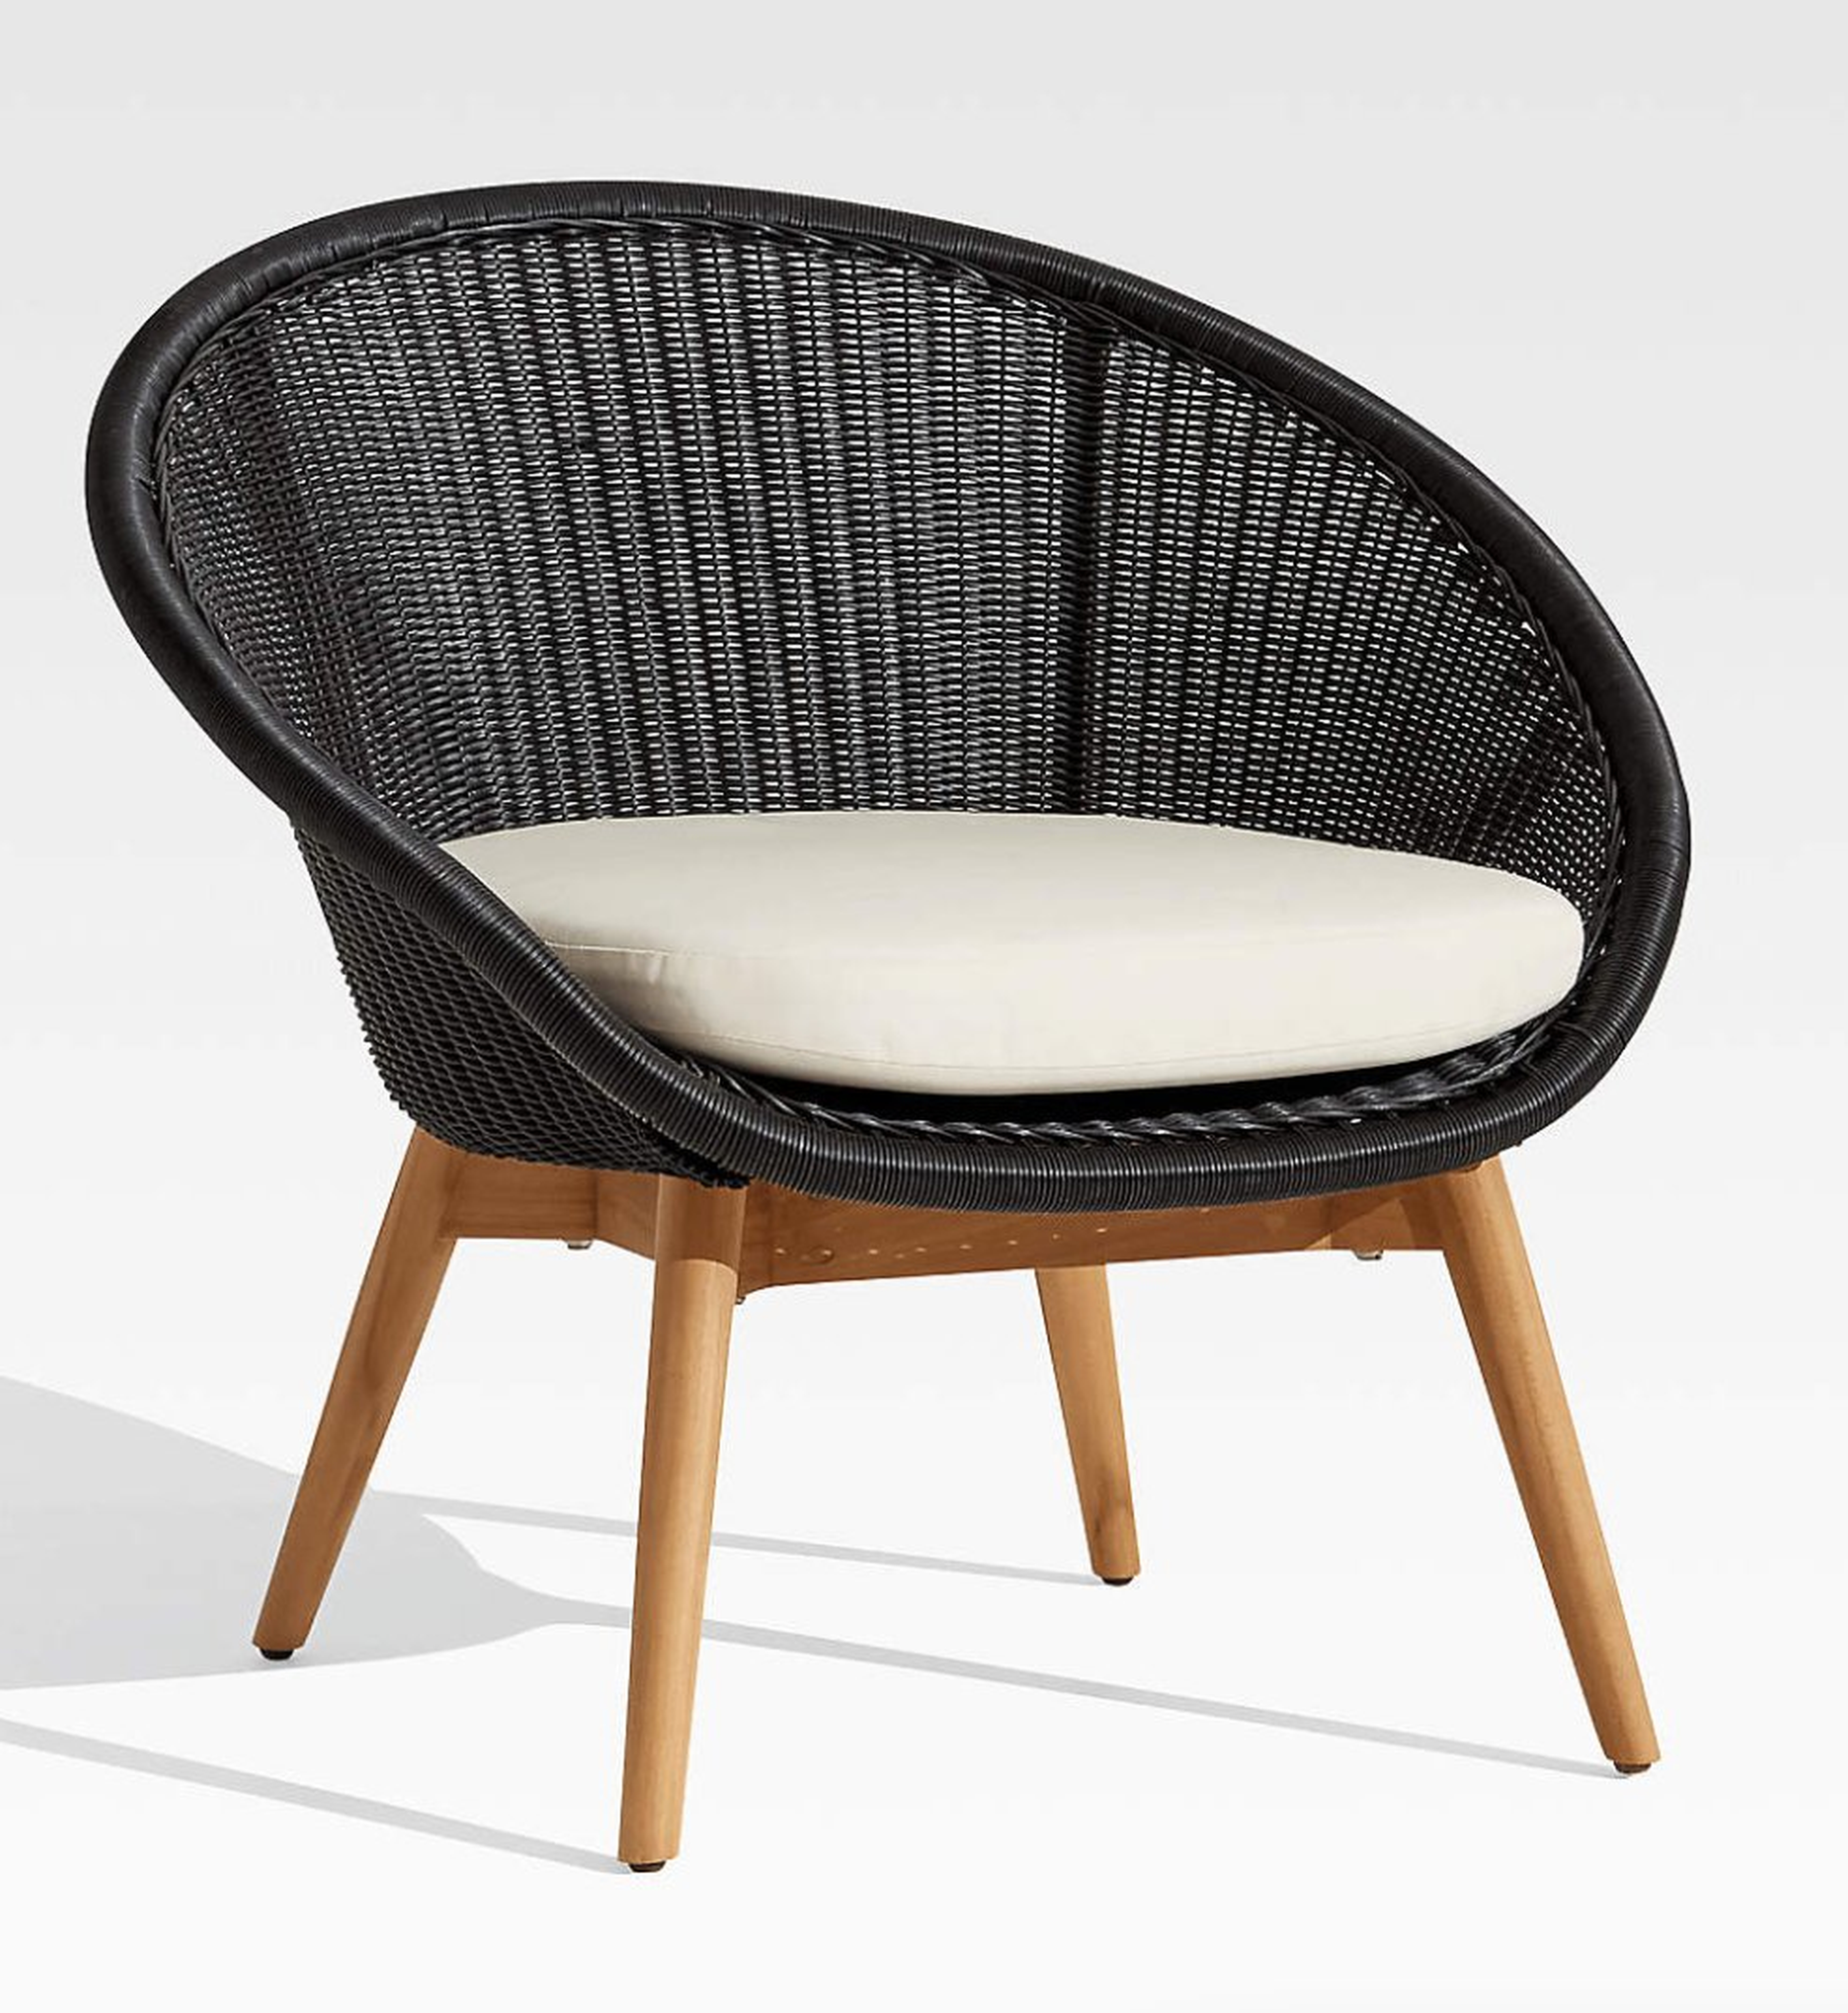 Loon Black Outdoor Lounge Chair - Crate and Barrel